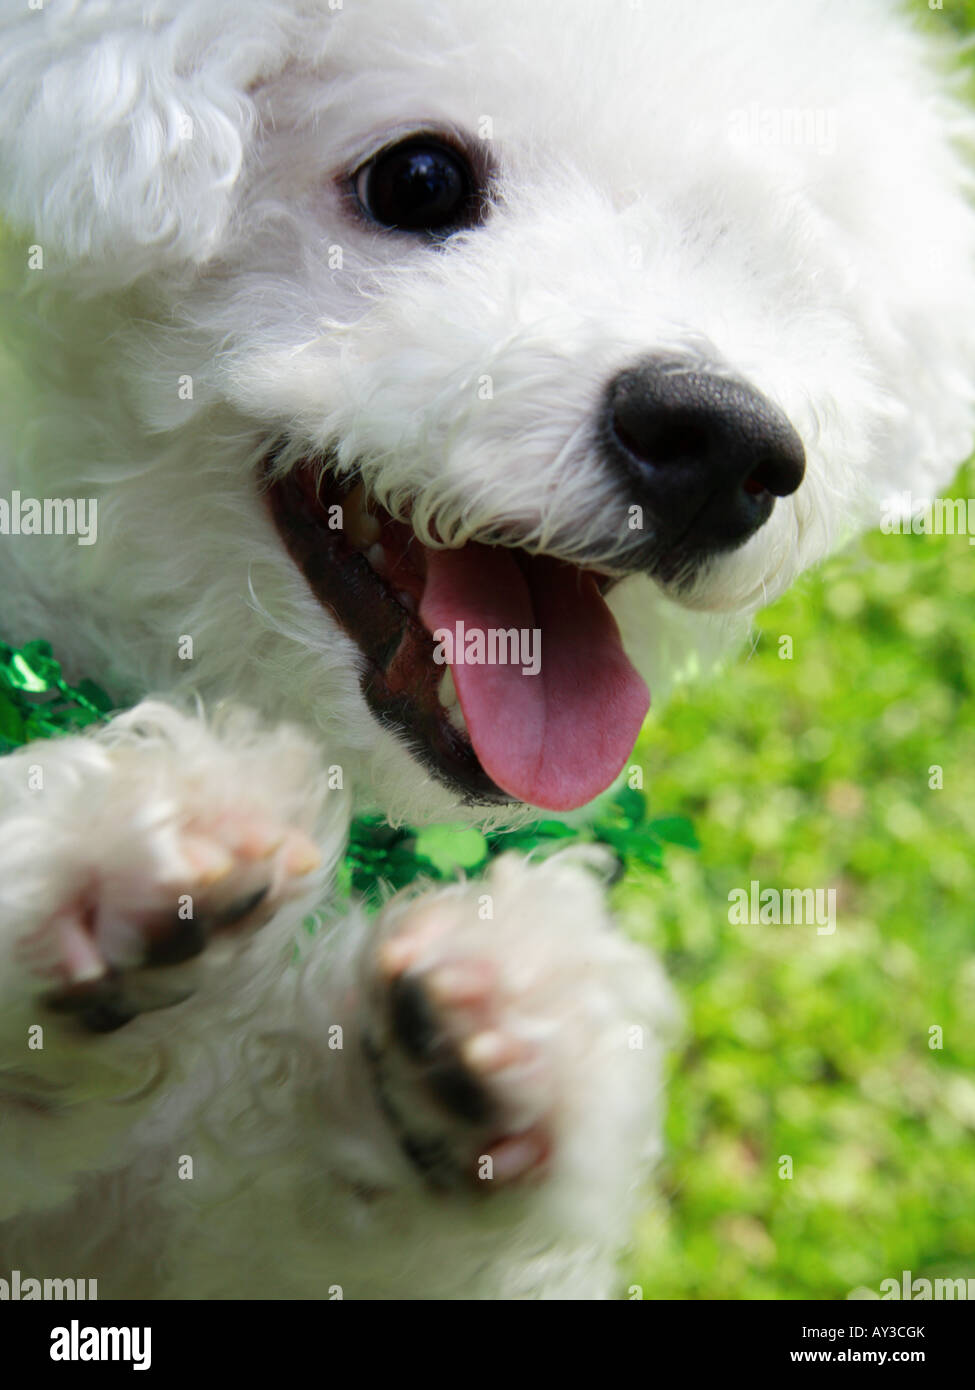 Close-up of a Bichon Frise sitting up and begging Stock Photo